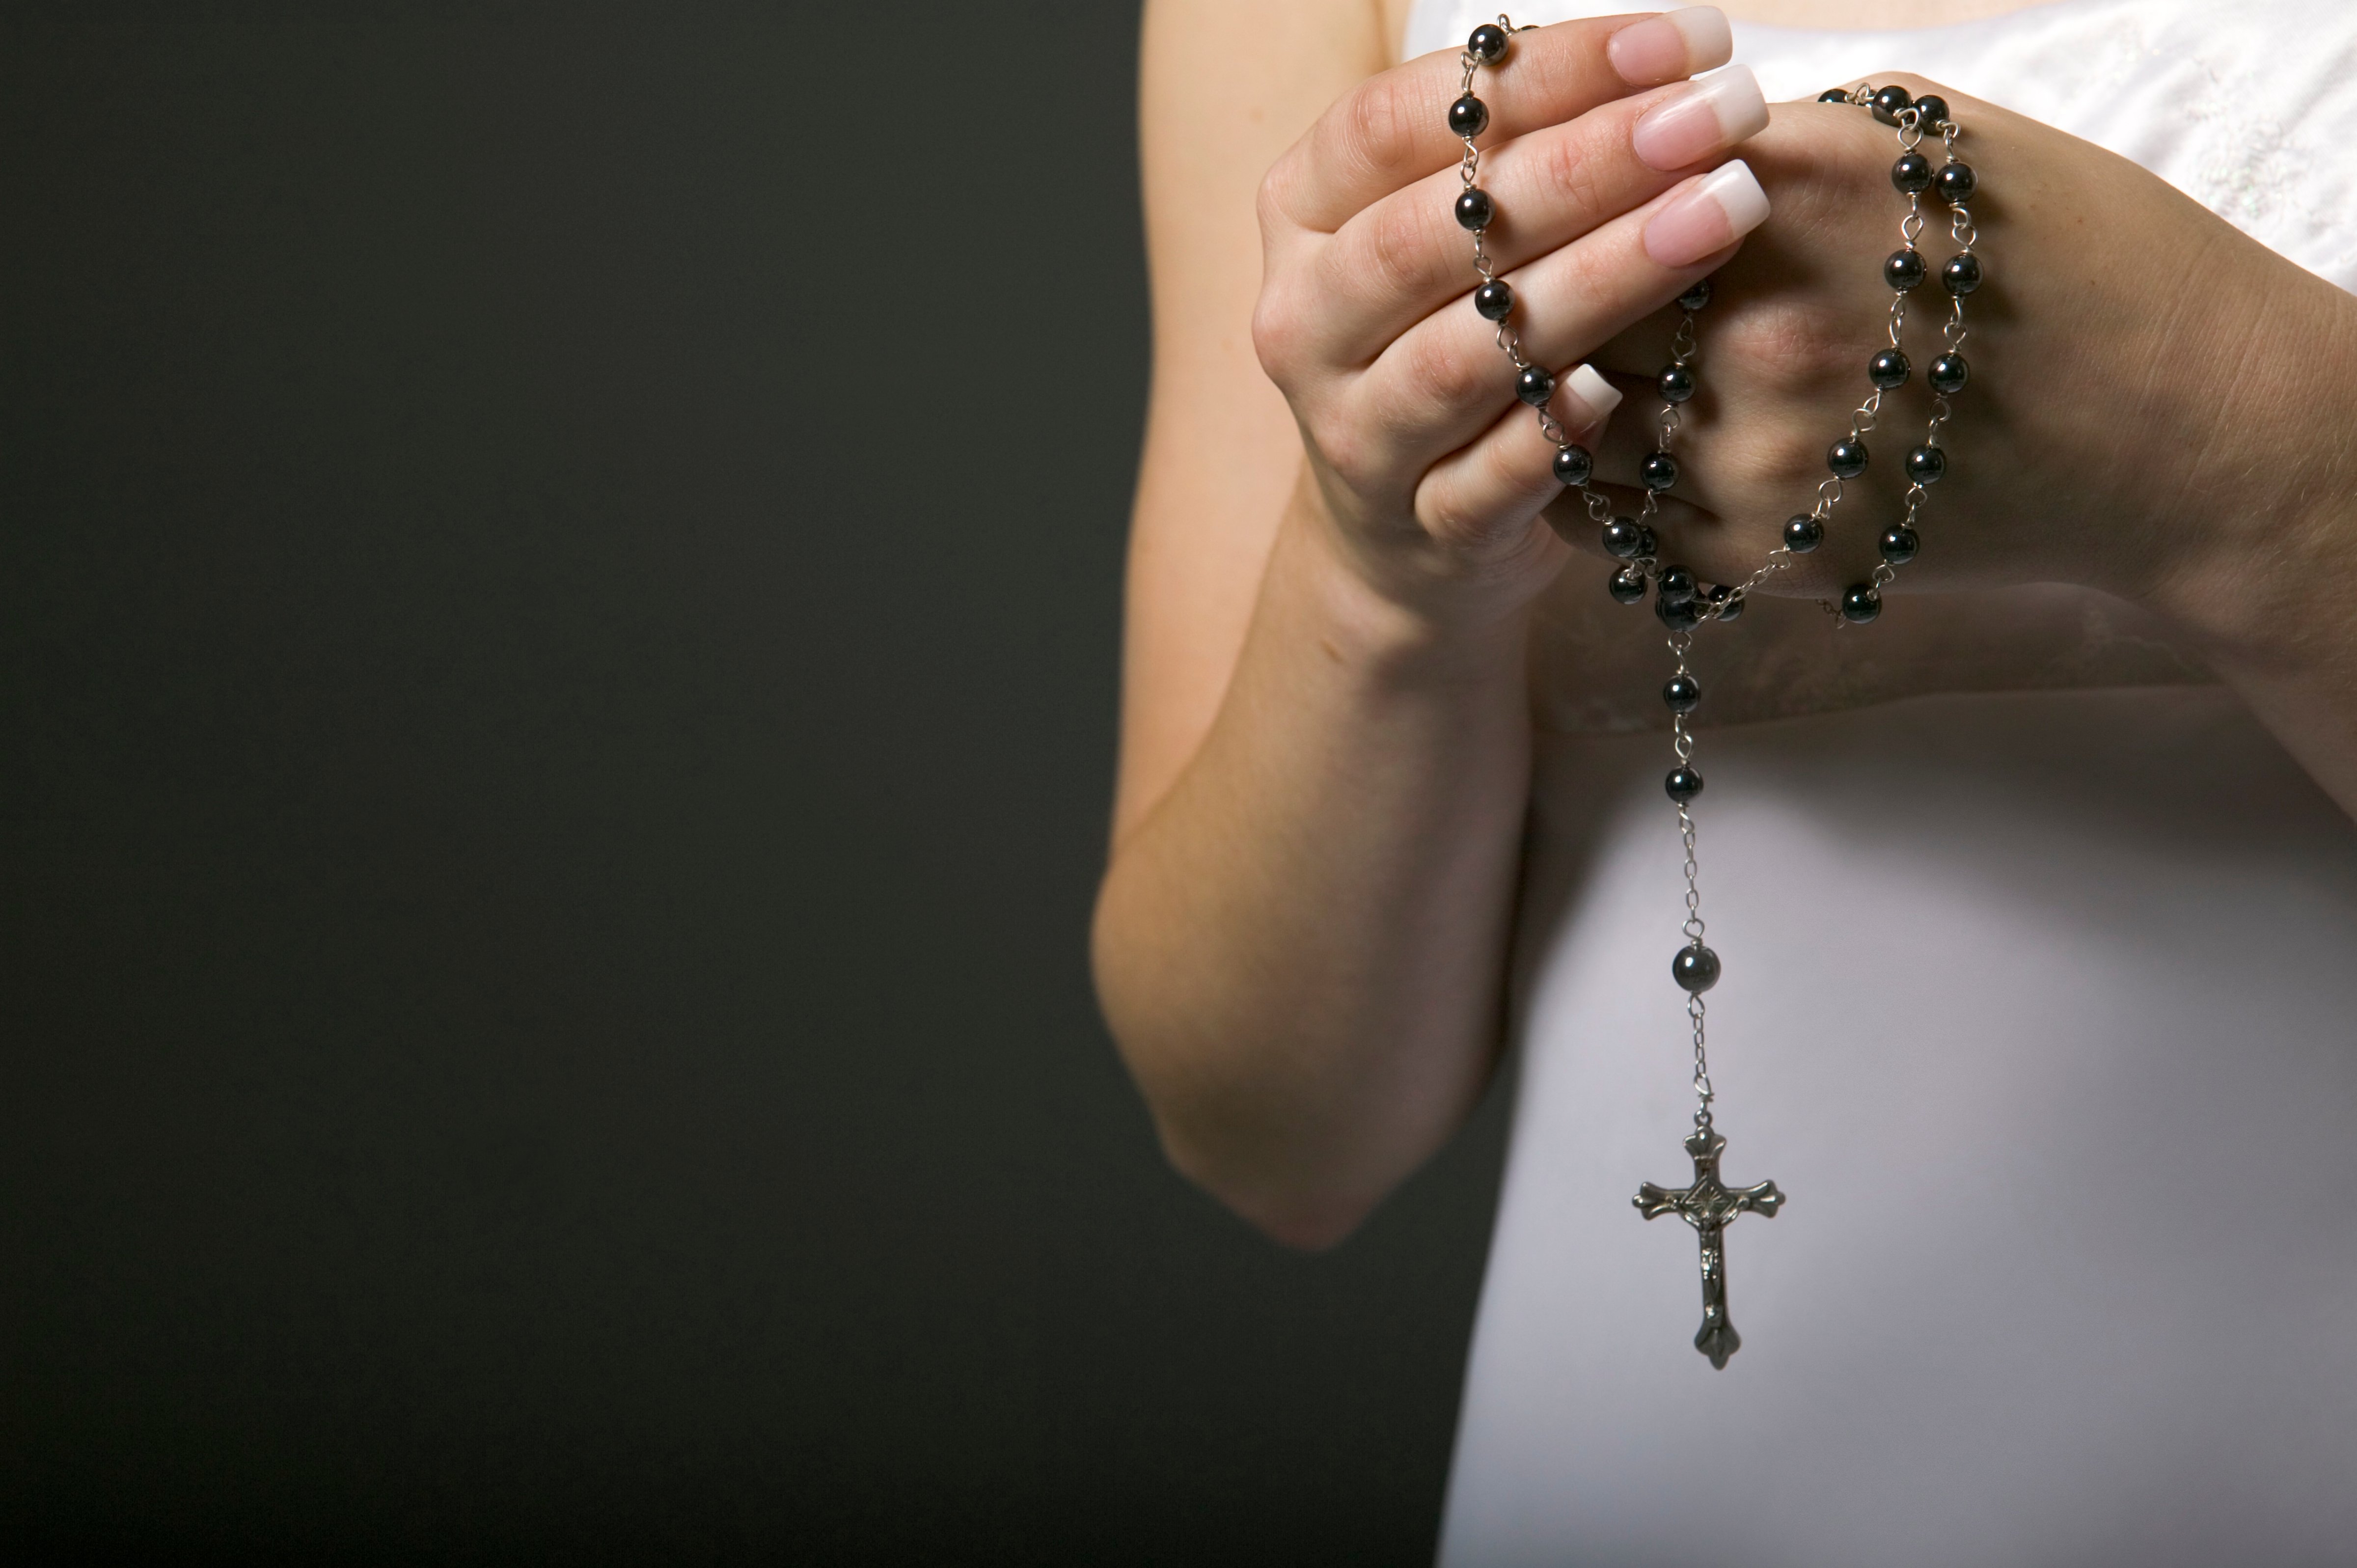 Woman holding rosary